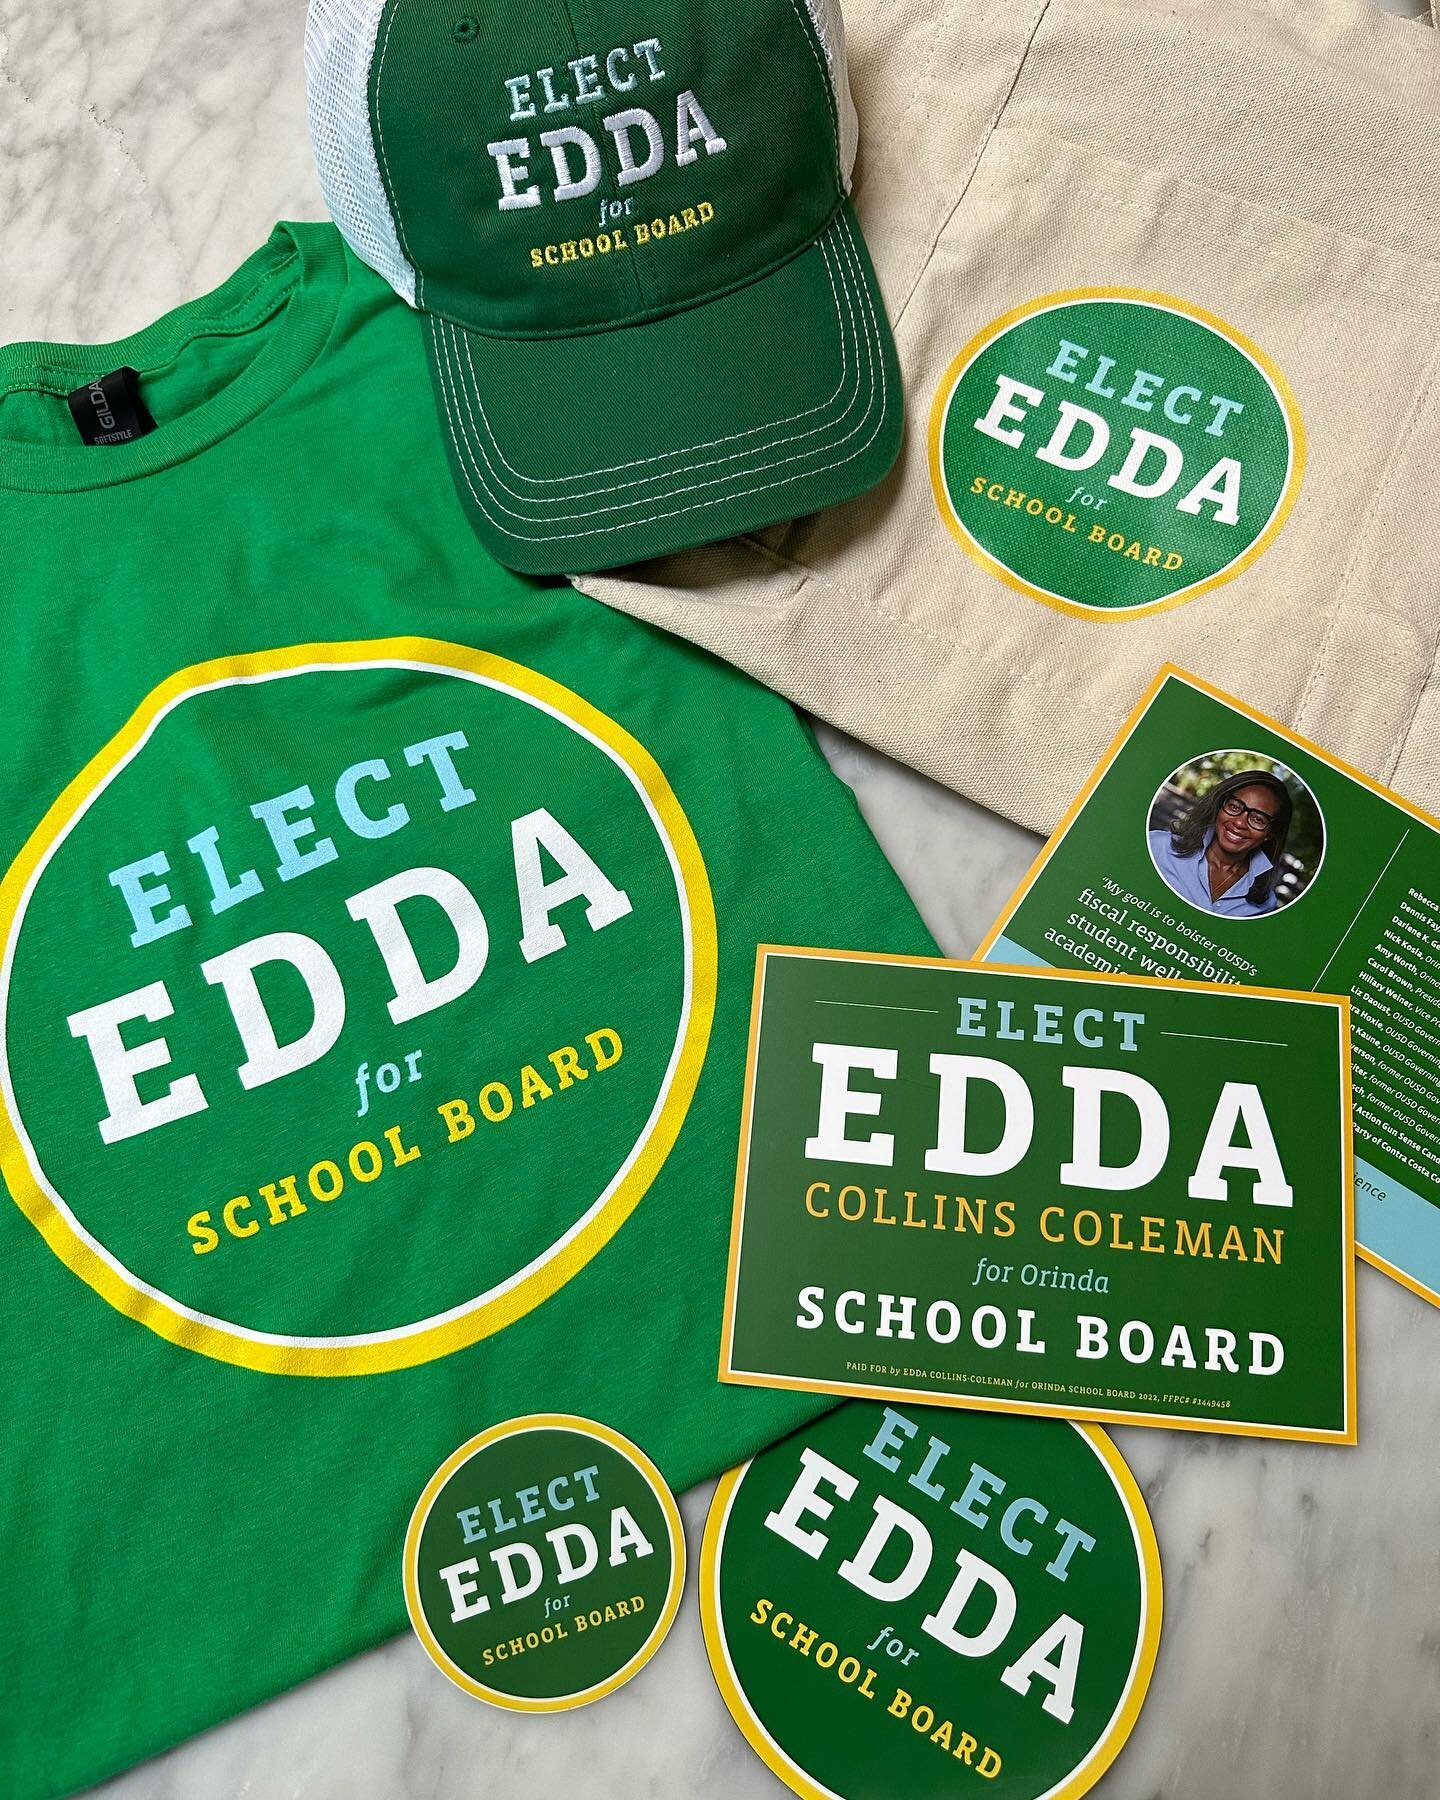 Not only is she an extremely qualified candidate for Orinda City Council, but @electedda_ is also one of the best dressed in all of this cute swag! Honored to work on Edda&rsquo;s campaign materials. Go vote!!